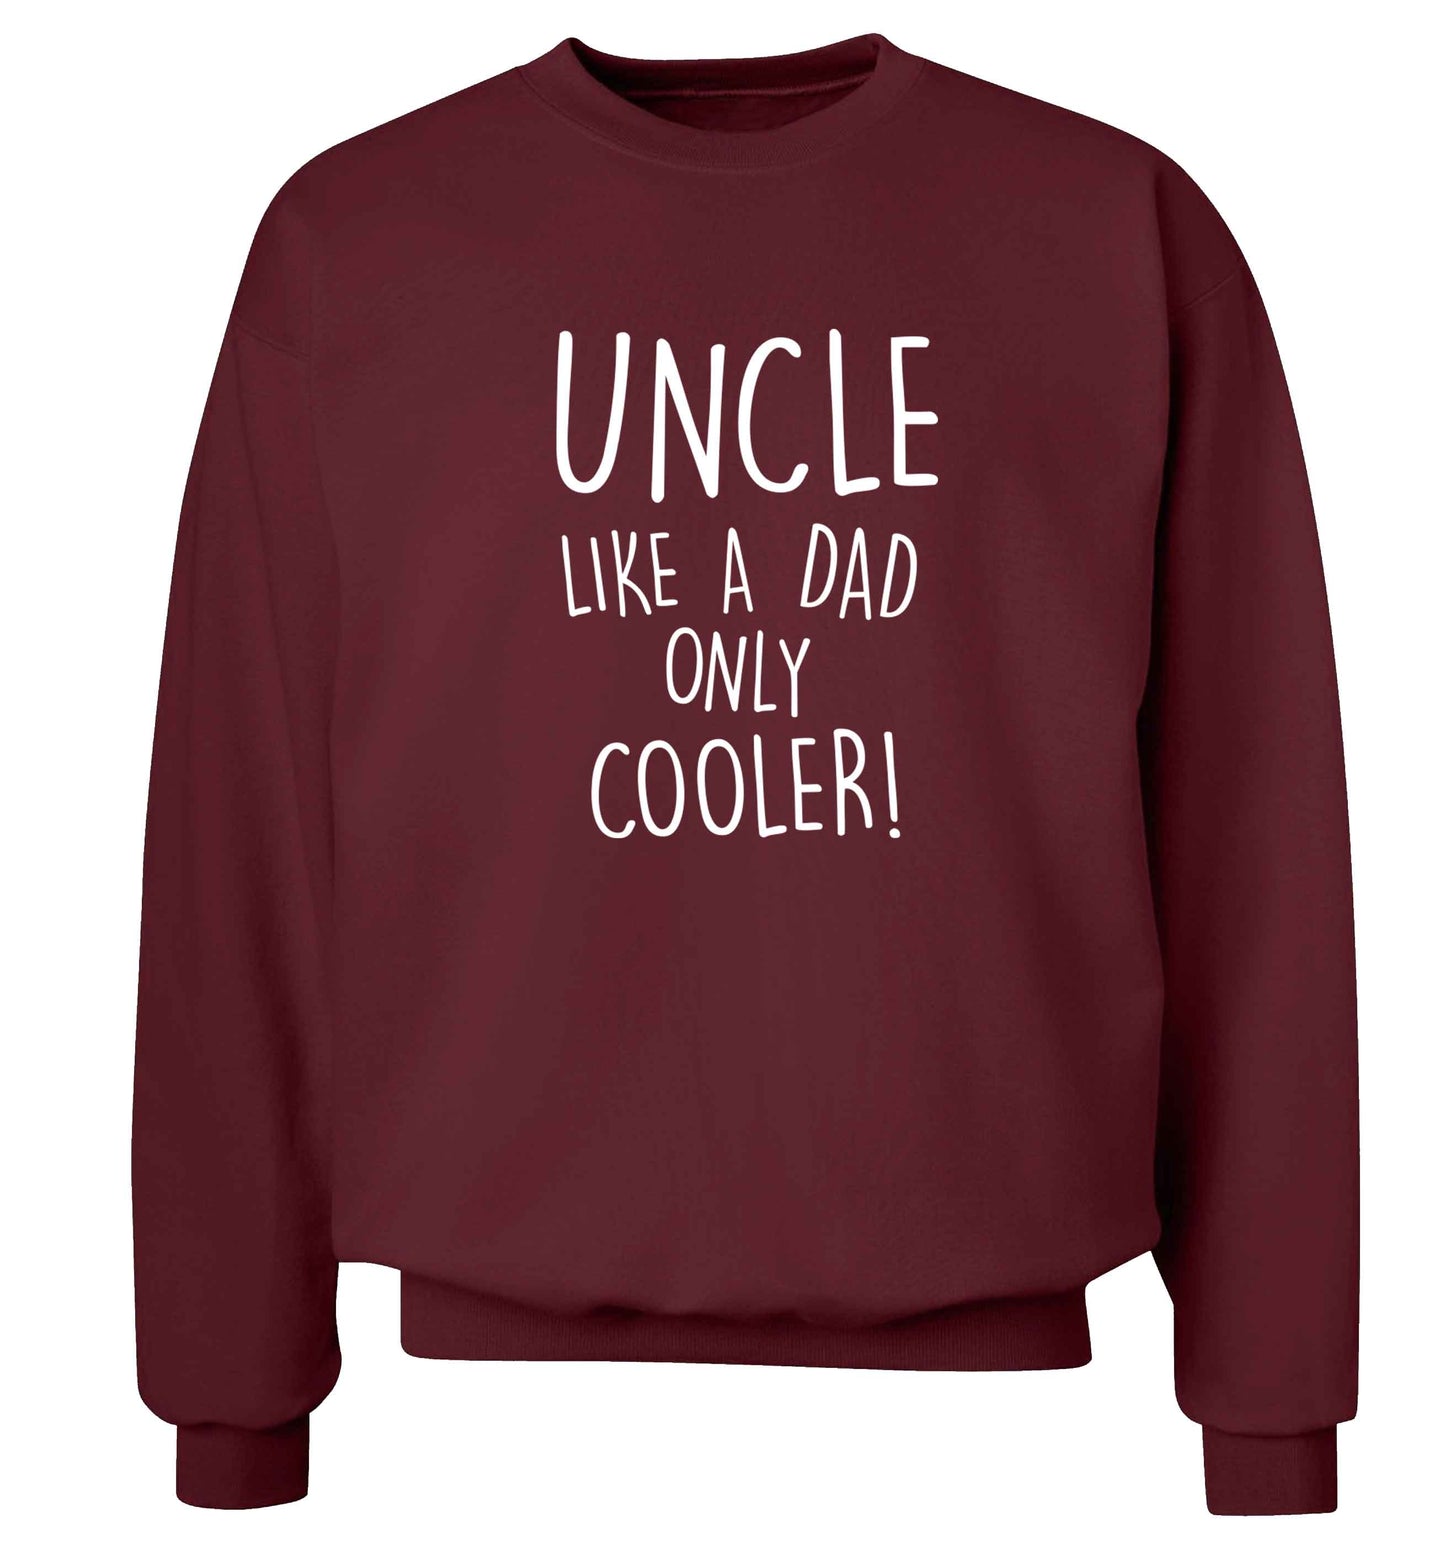 Uncle like a dad only cooler adult's unisex maroon sweater 2XL